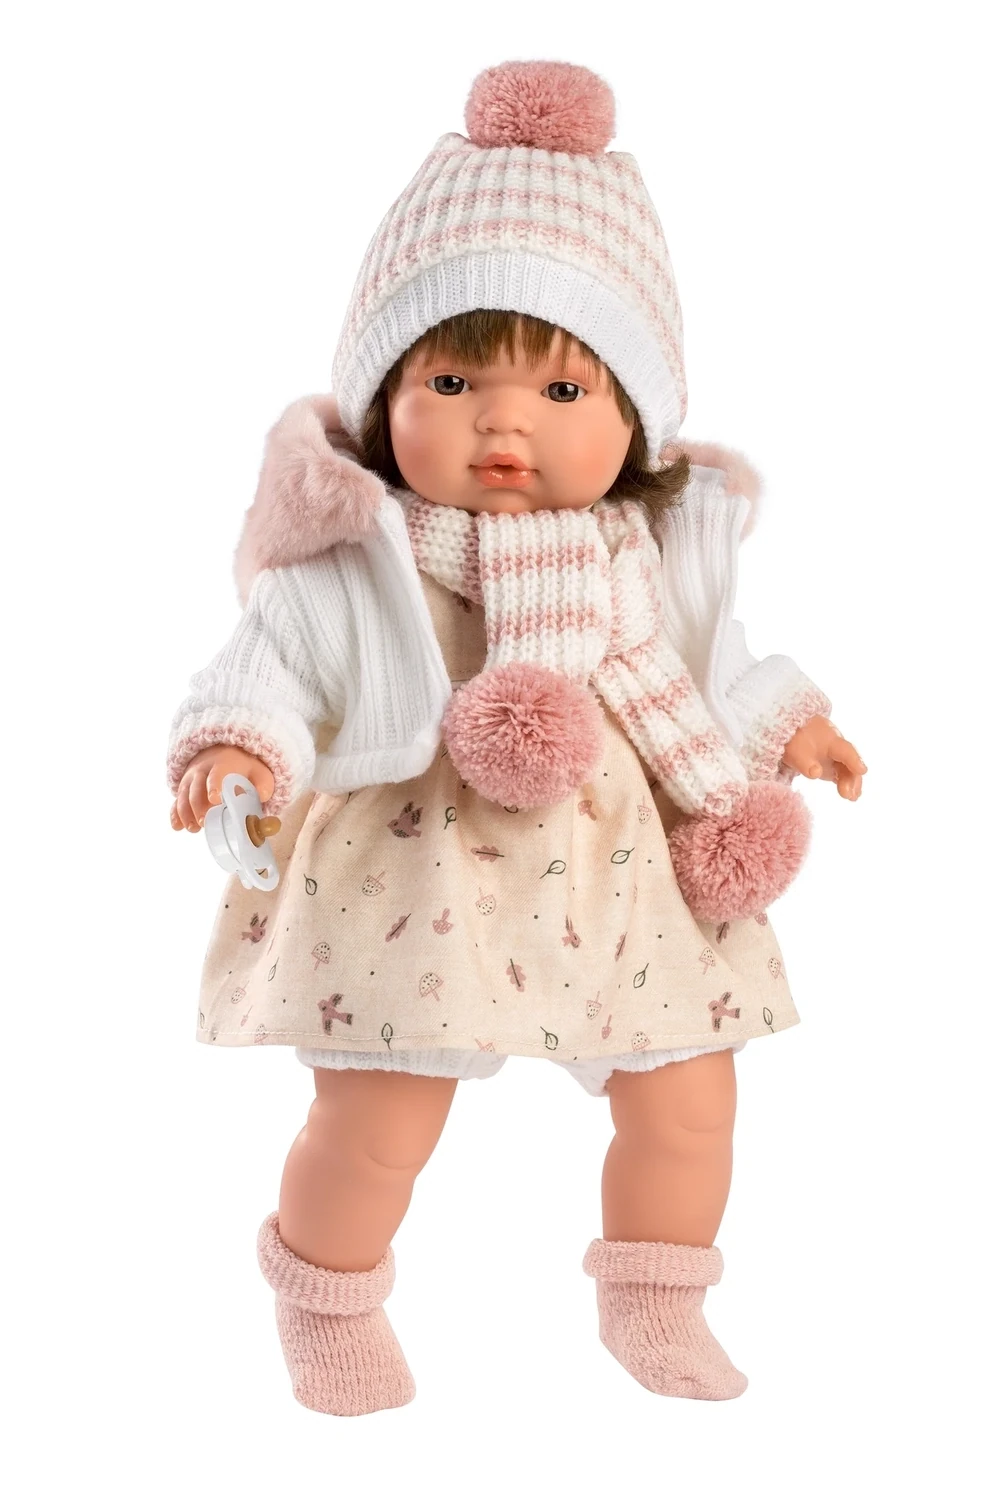 Llorens 38568 Grace 15" Soft Body Crying Baby Doll